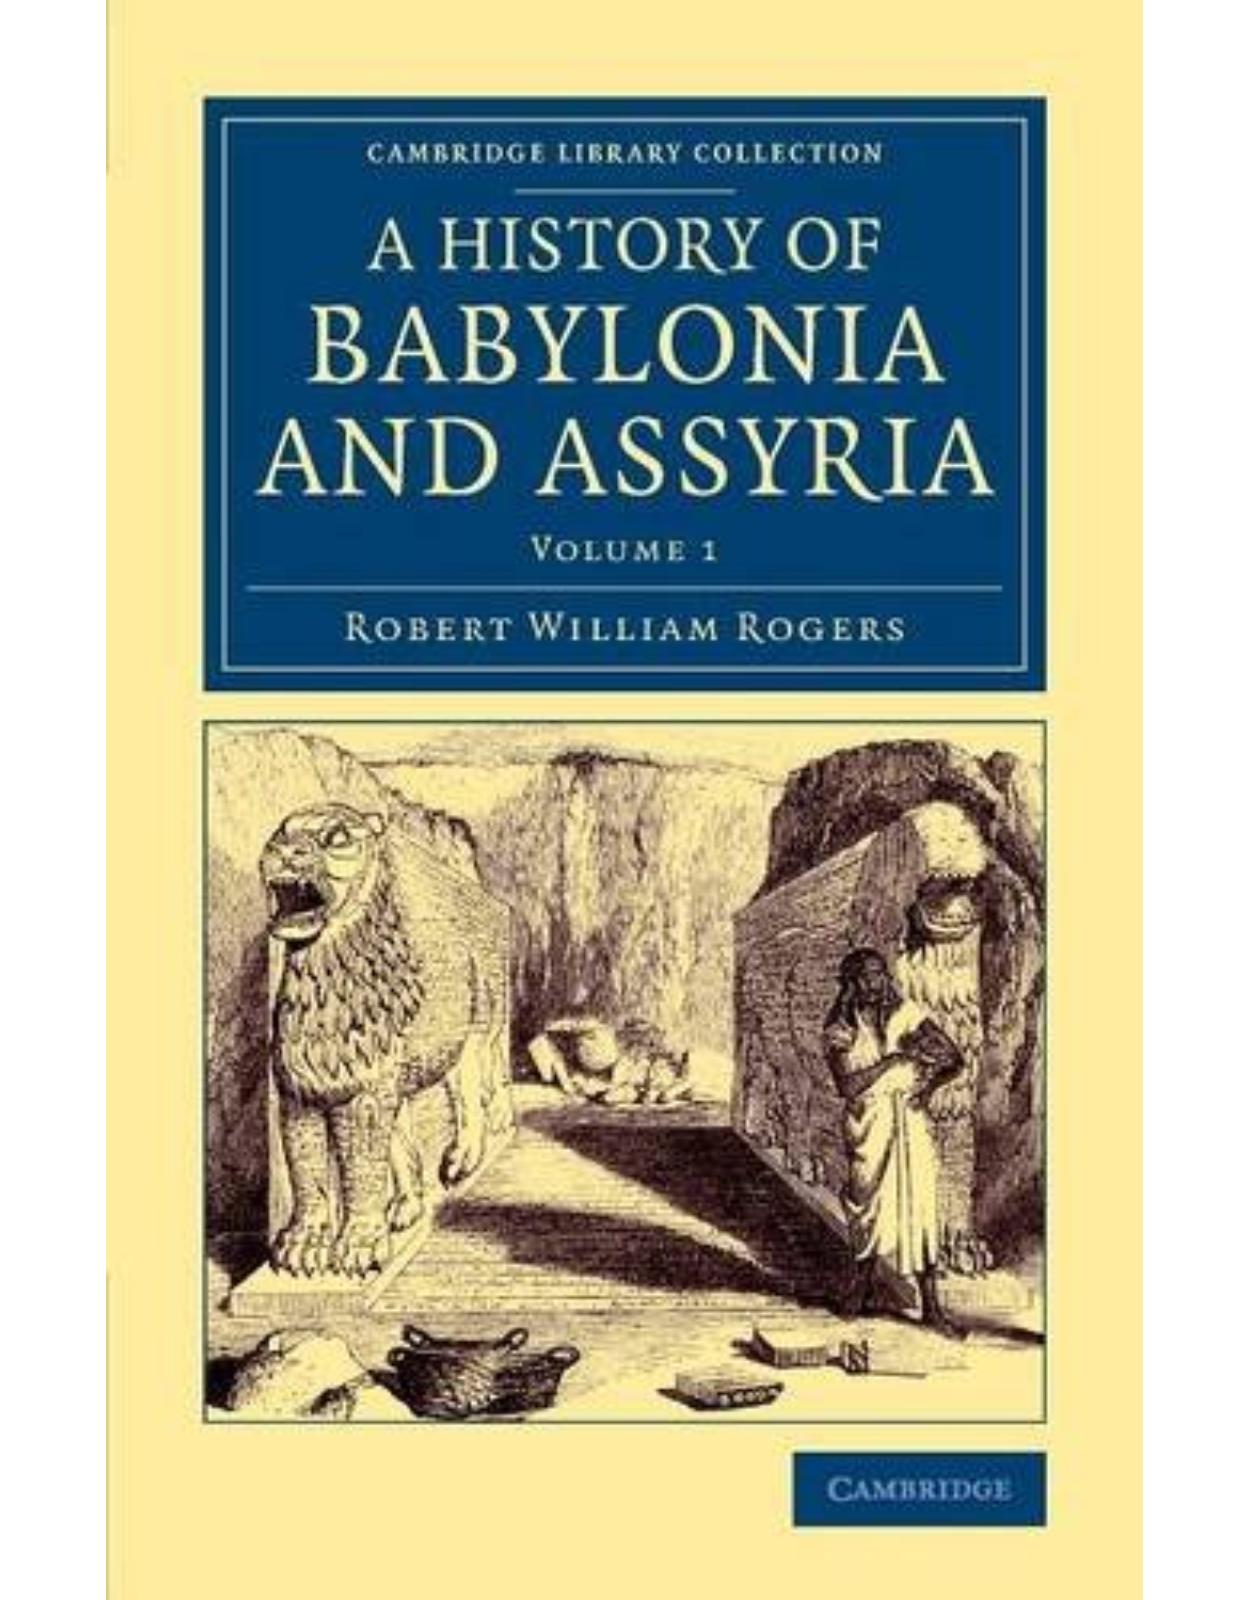 History of Babylonia and Assyria: Volume 1 (Cambridge Library Collection - Archaeology)